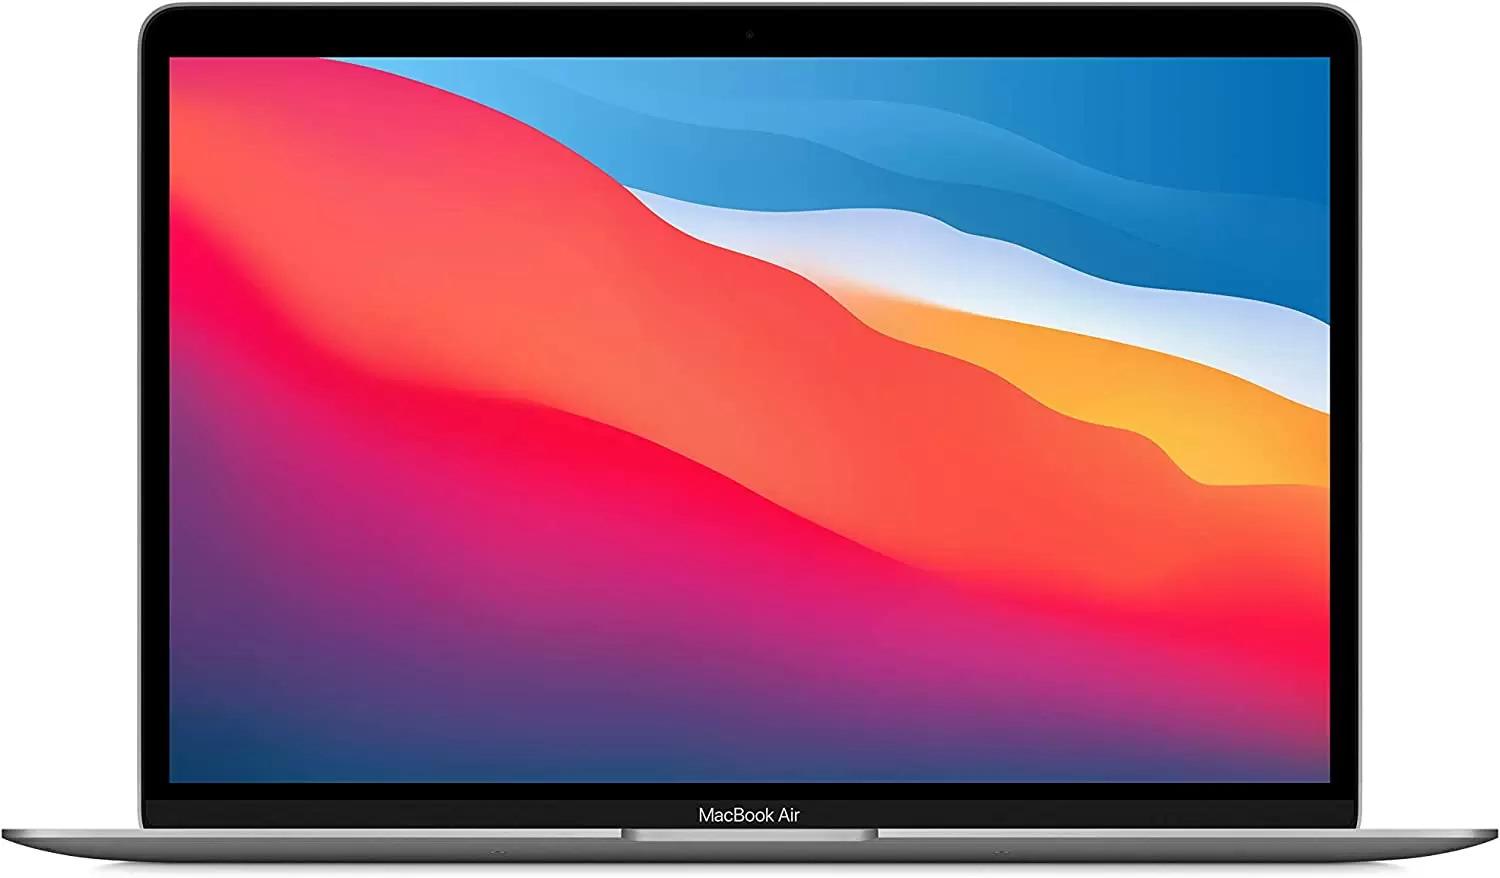 Apple MacBook Air 13.3in M1 8GB 256GB SSD Notebook Laptop for $749.99 Shipped